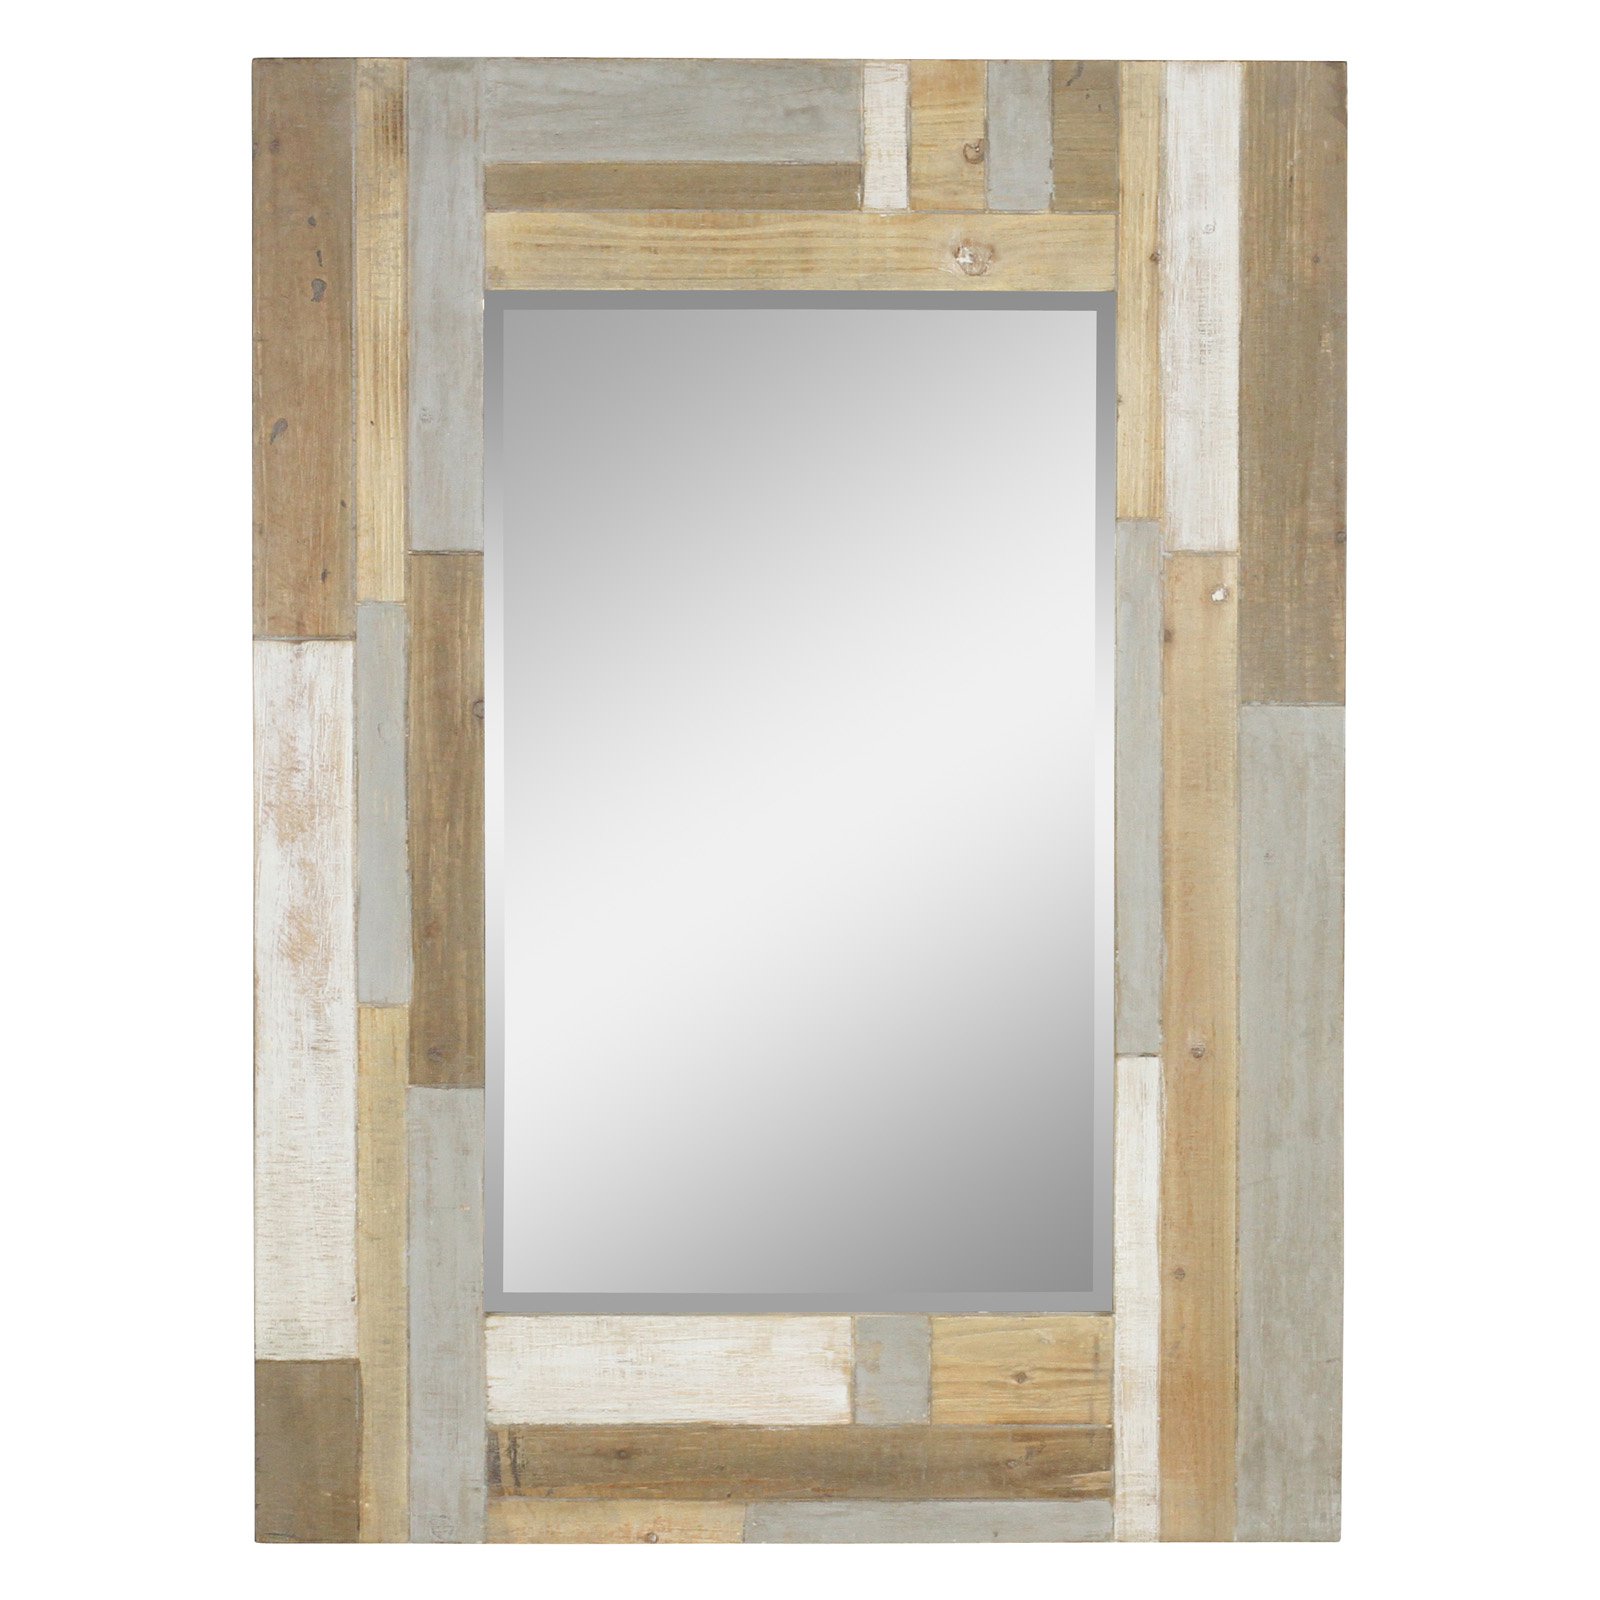 Aspire Home Accents Duncan Farmhouse Wall Mirror - 28W x 38H in. - image 1 of 7